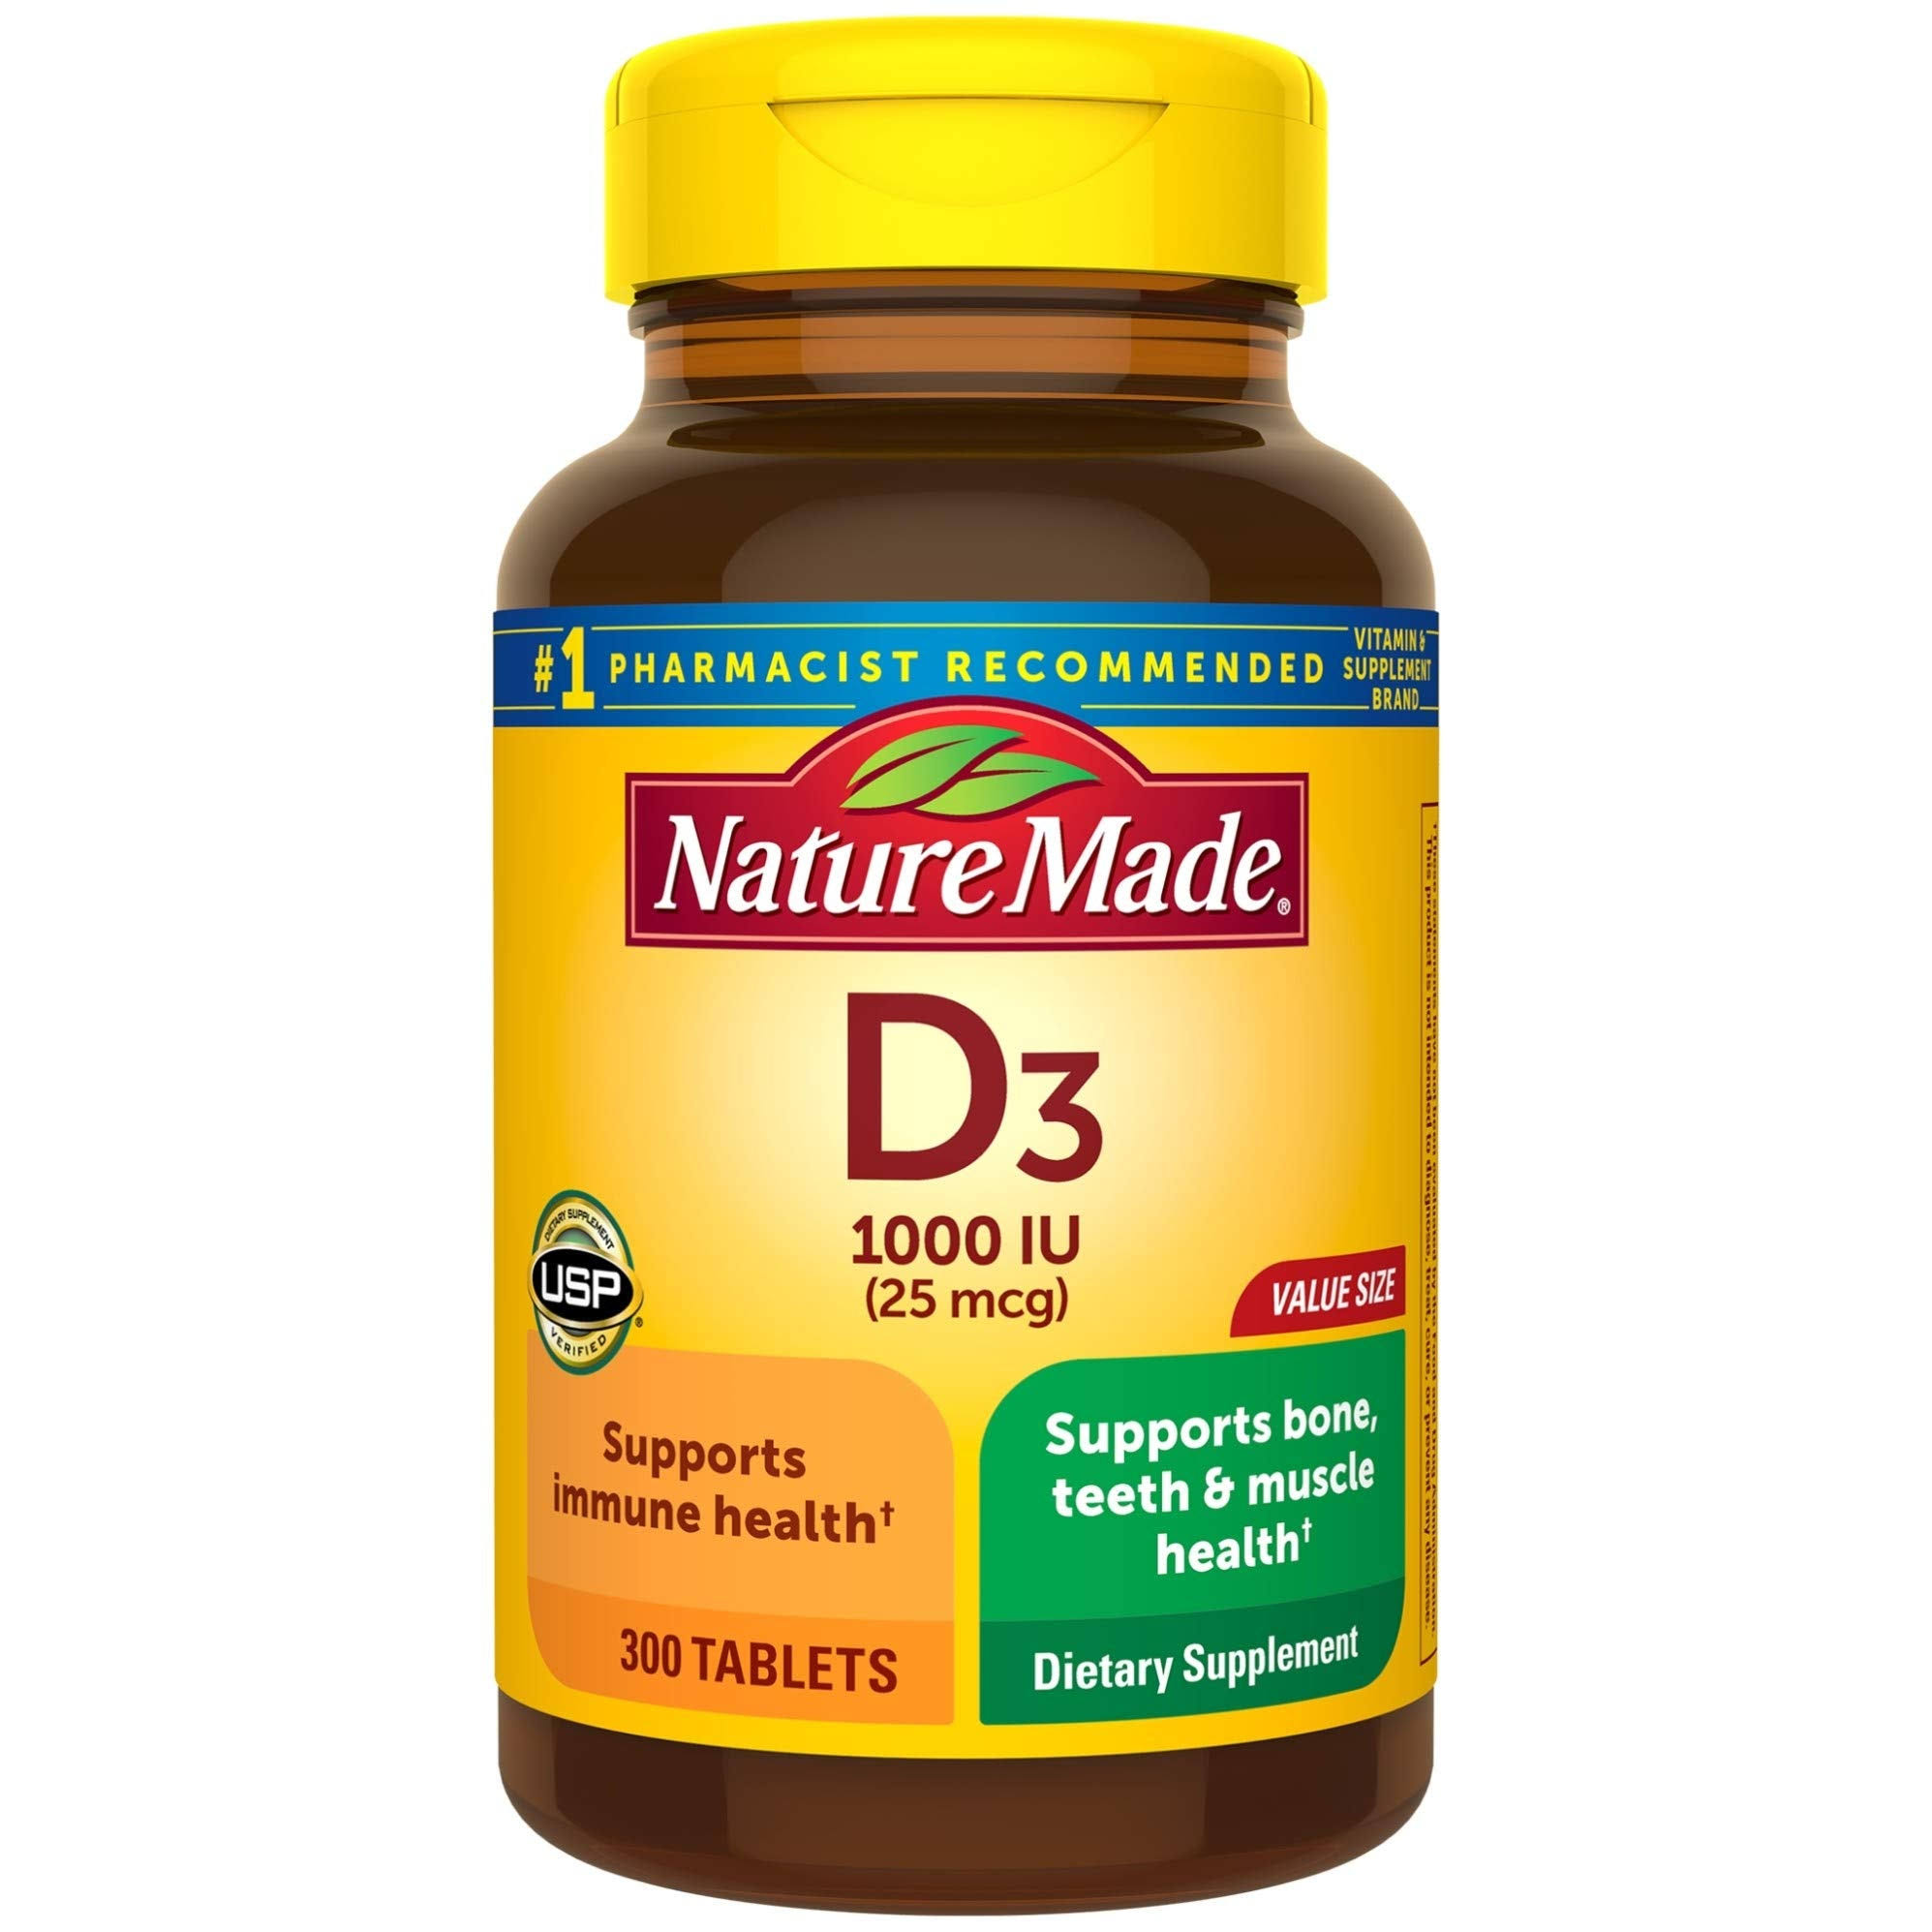 Nature Made Vitamin D3 1000 IU Dietary Supplement - 300 Tablets